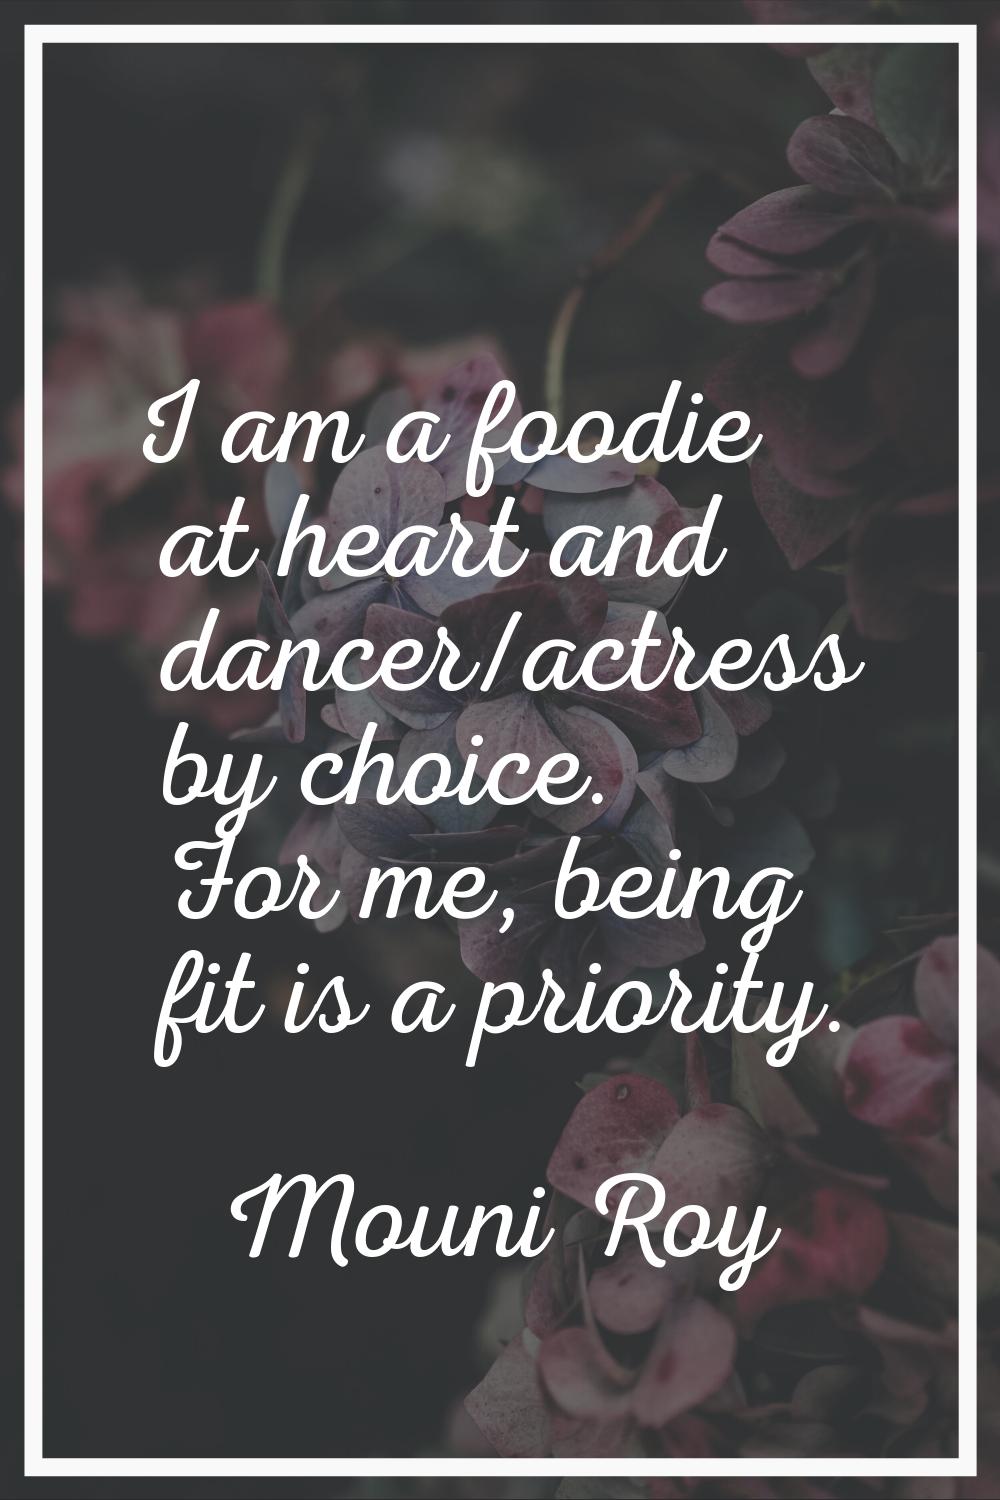 I am a foodie at heart and dancer/actress by choice. For me, being fit is a priority.